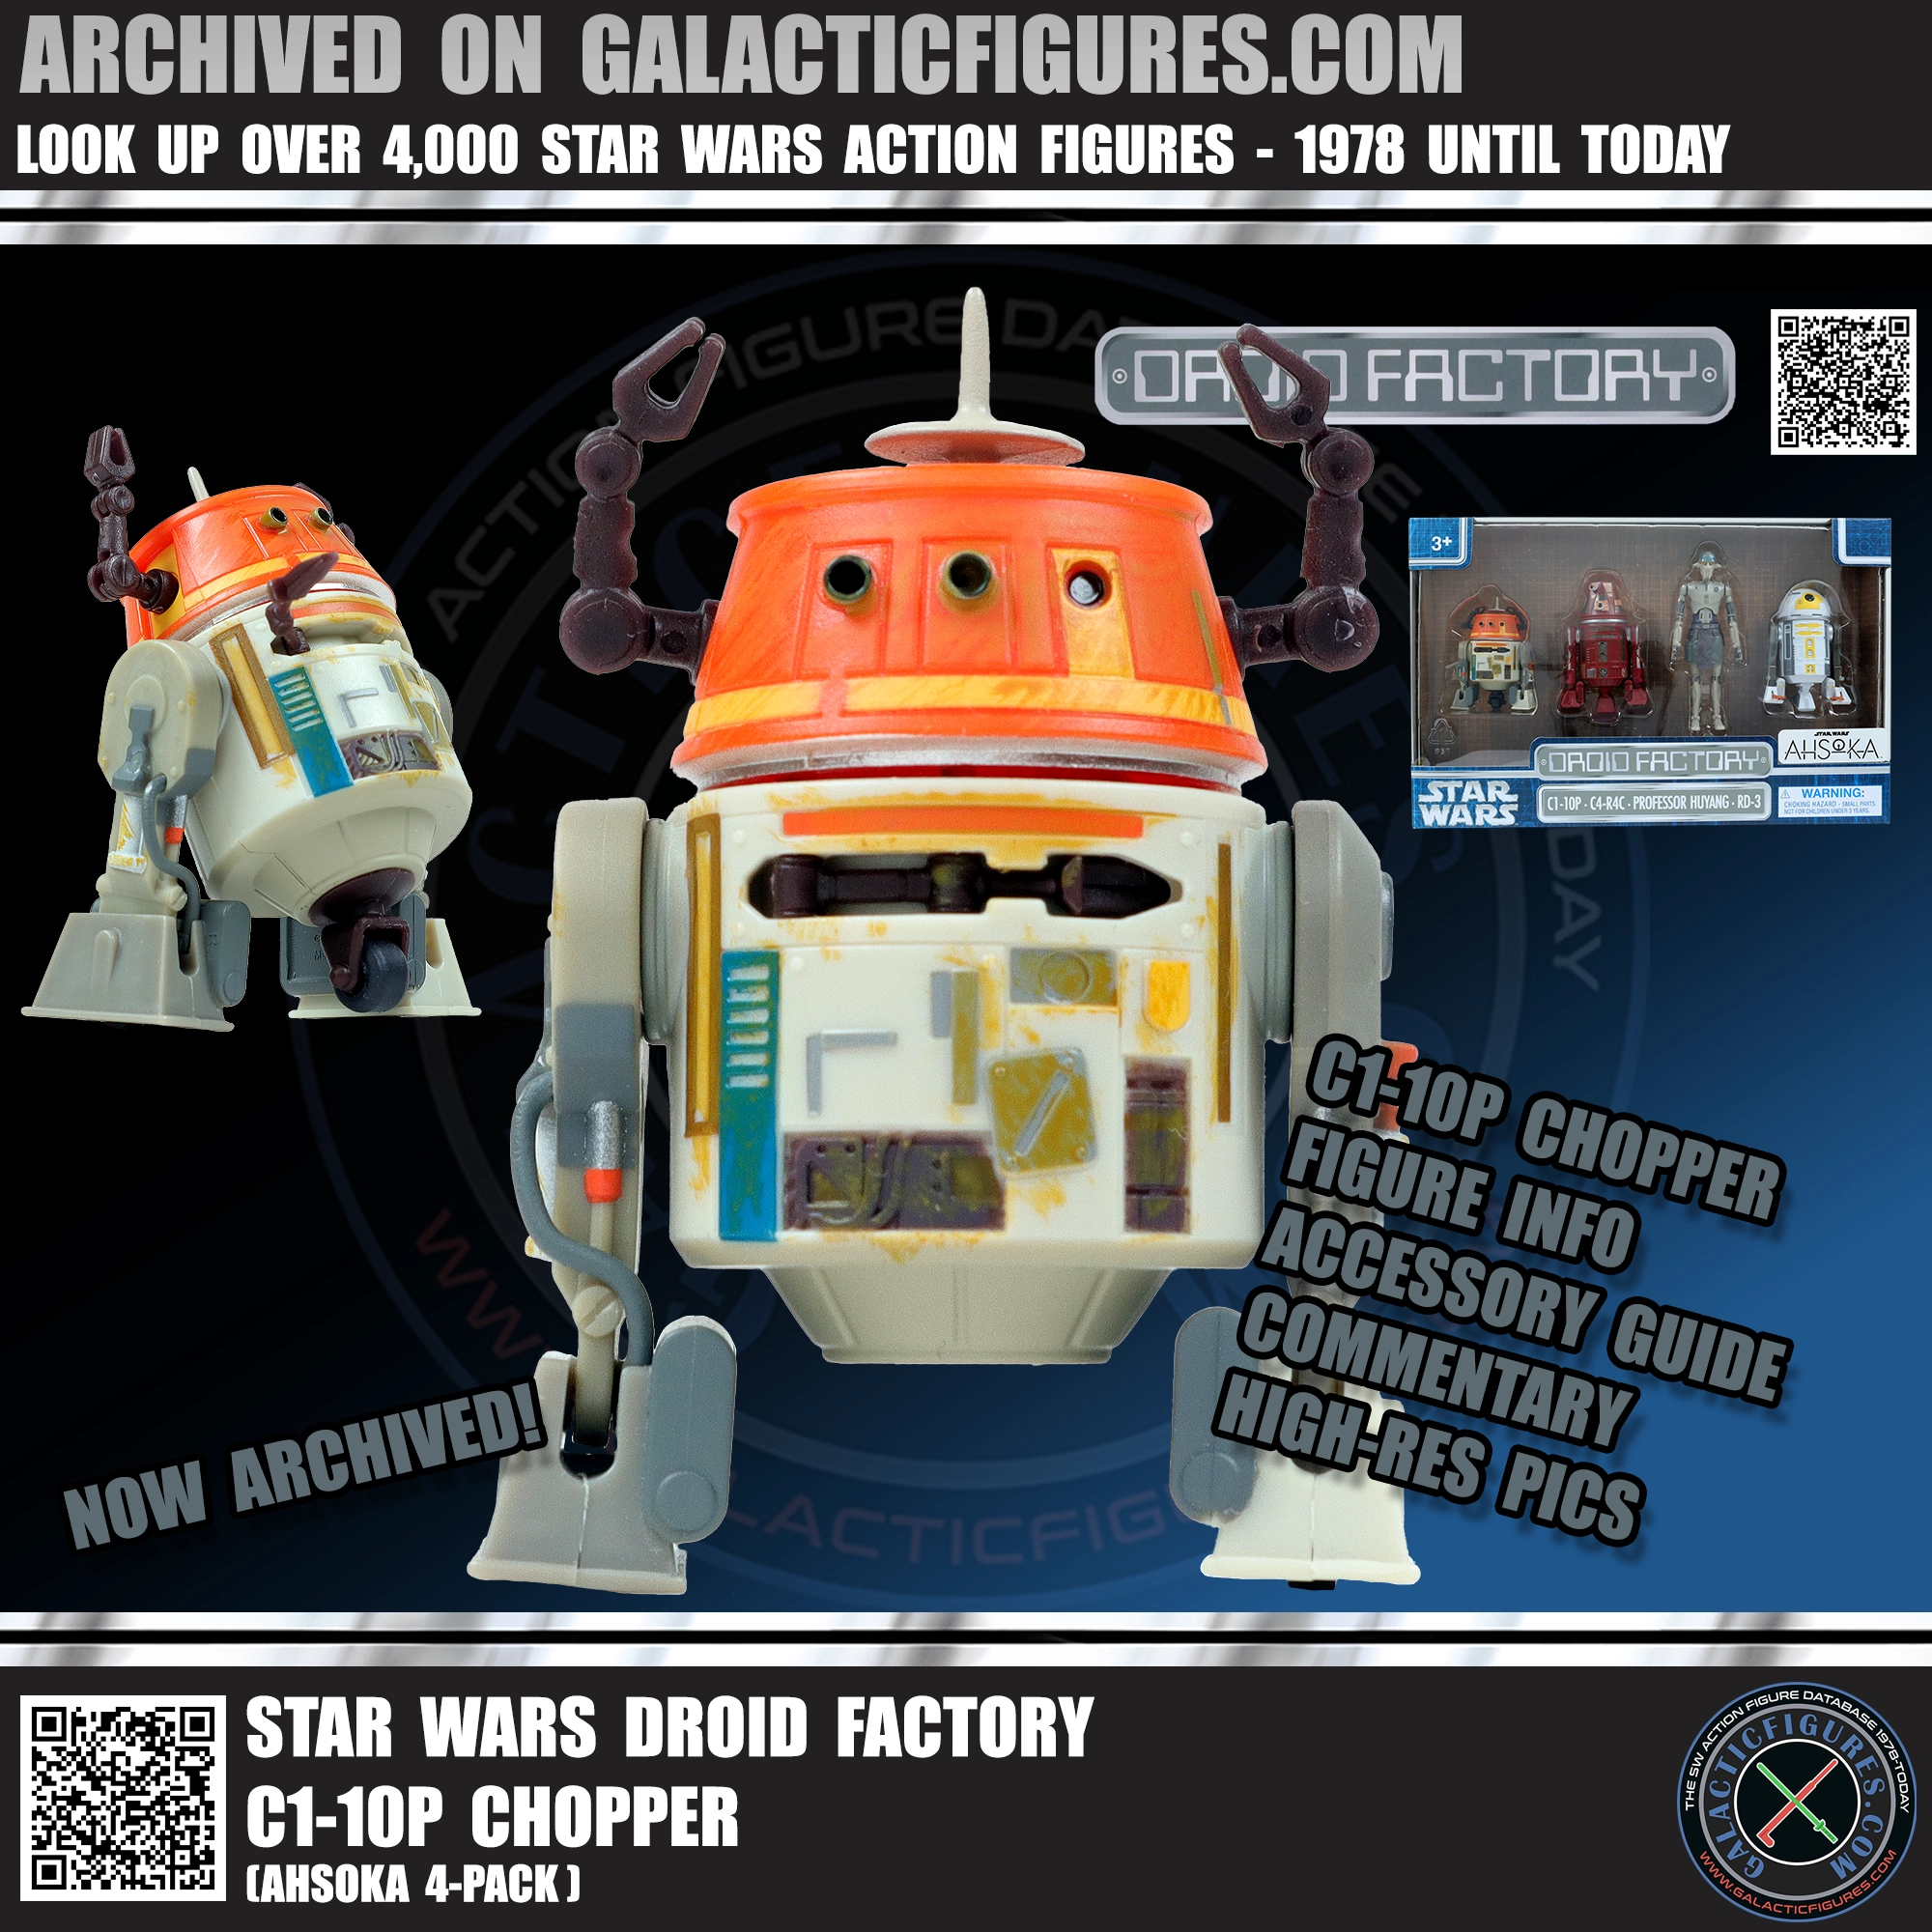 Droid Factory Chopper Added